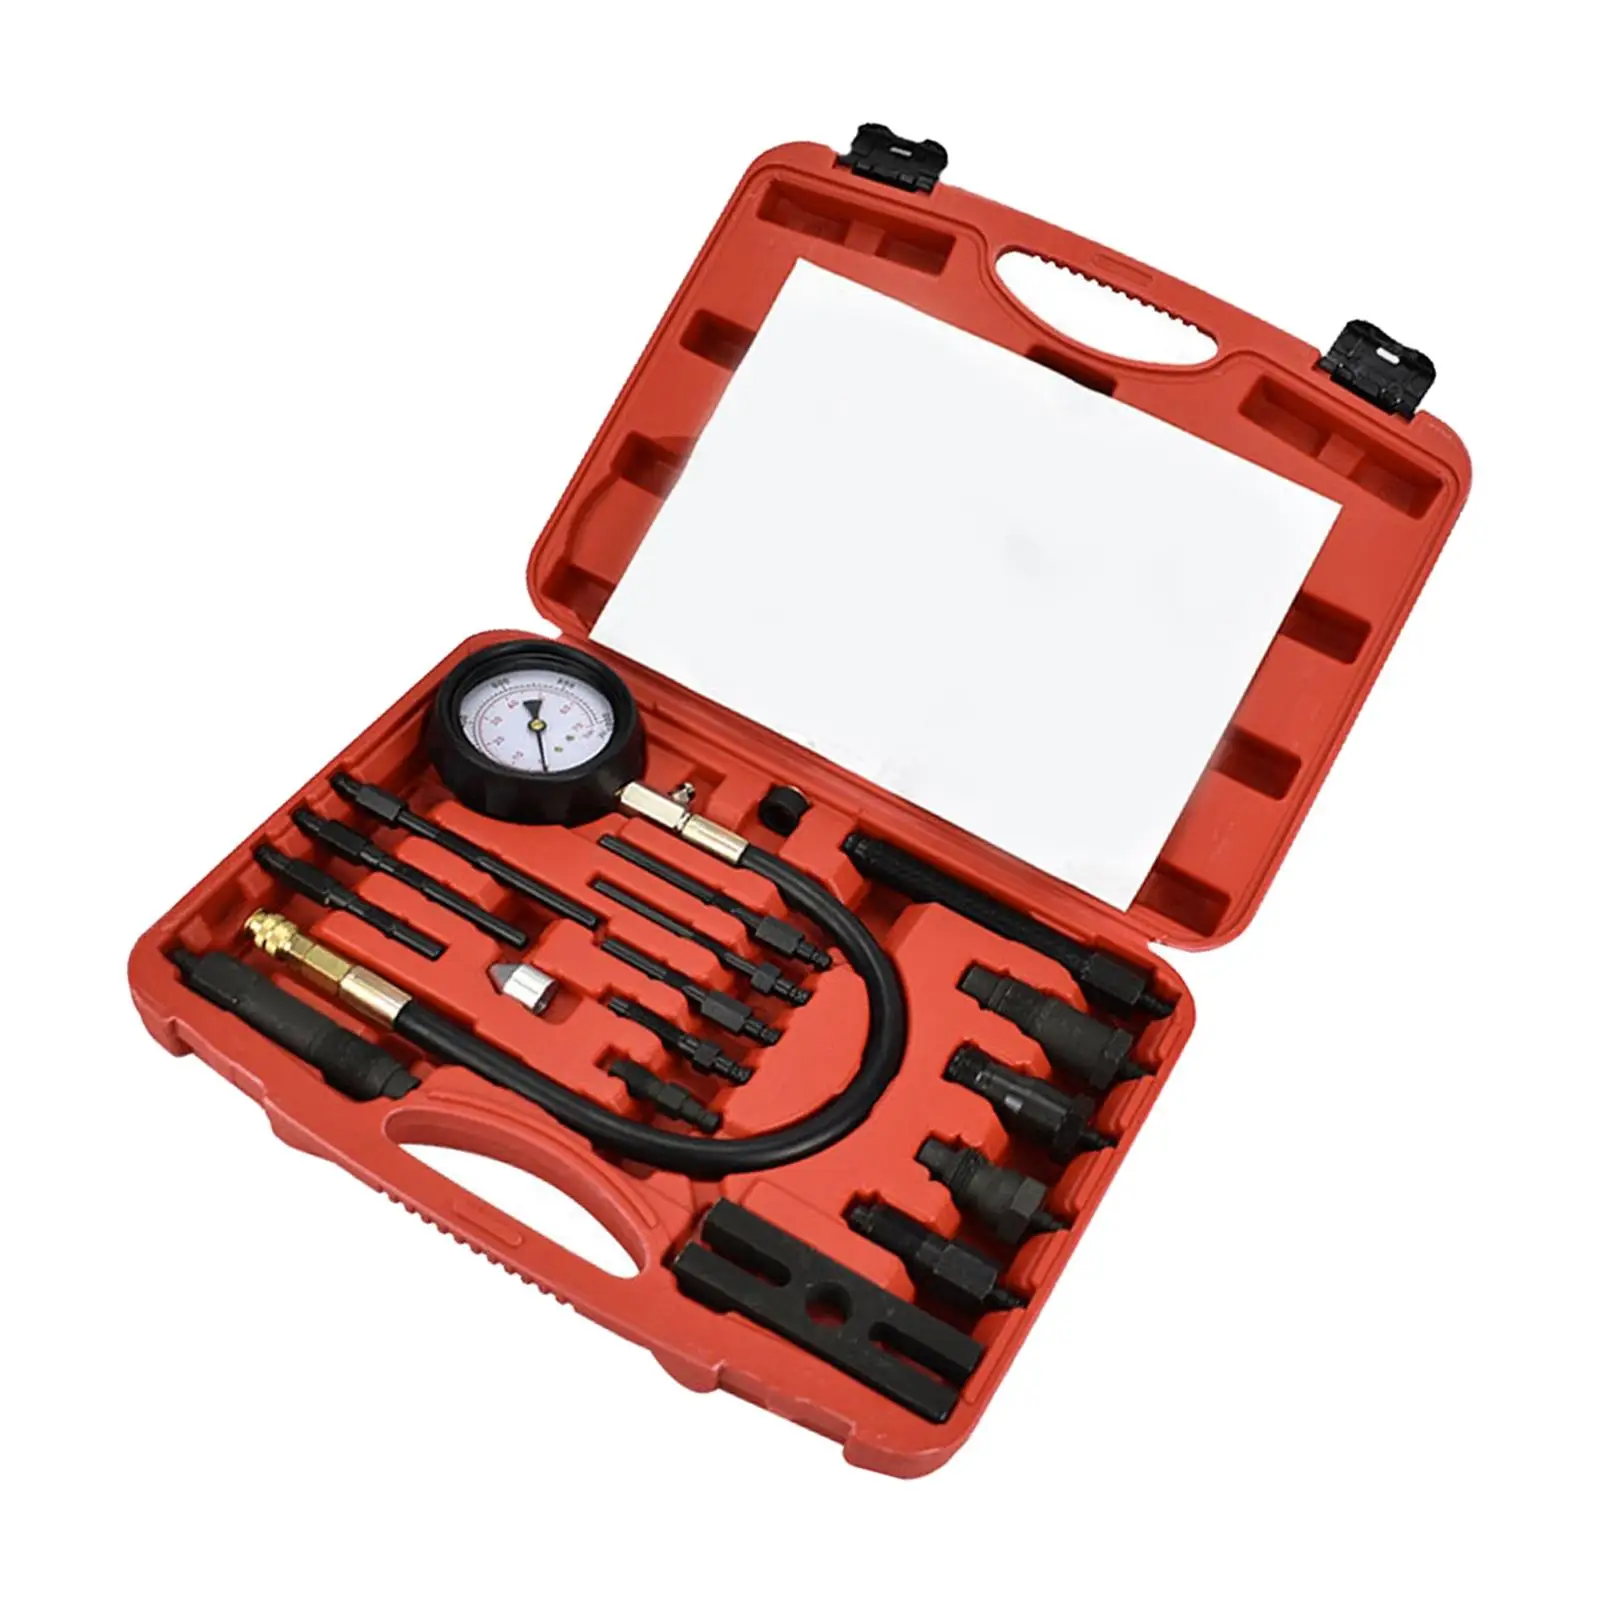 17Pcs Diesel Engine Cylinder Compression Tester Tool, Quick Connection with Carrying Case Hardware Accessories Pressure Gauge